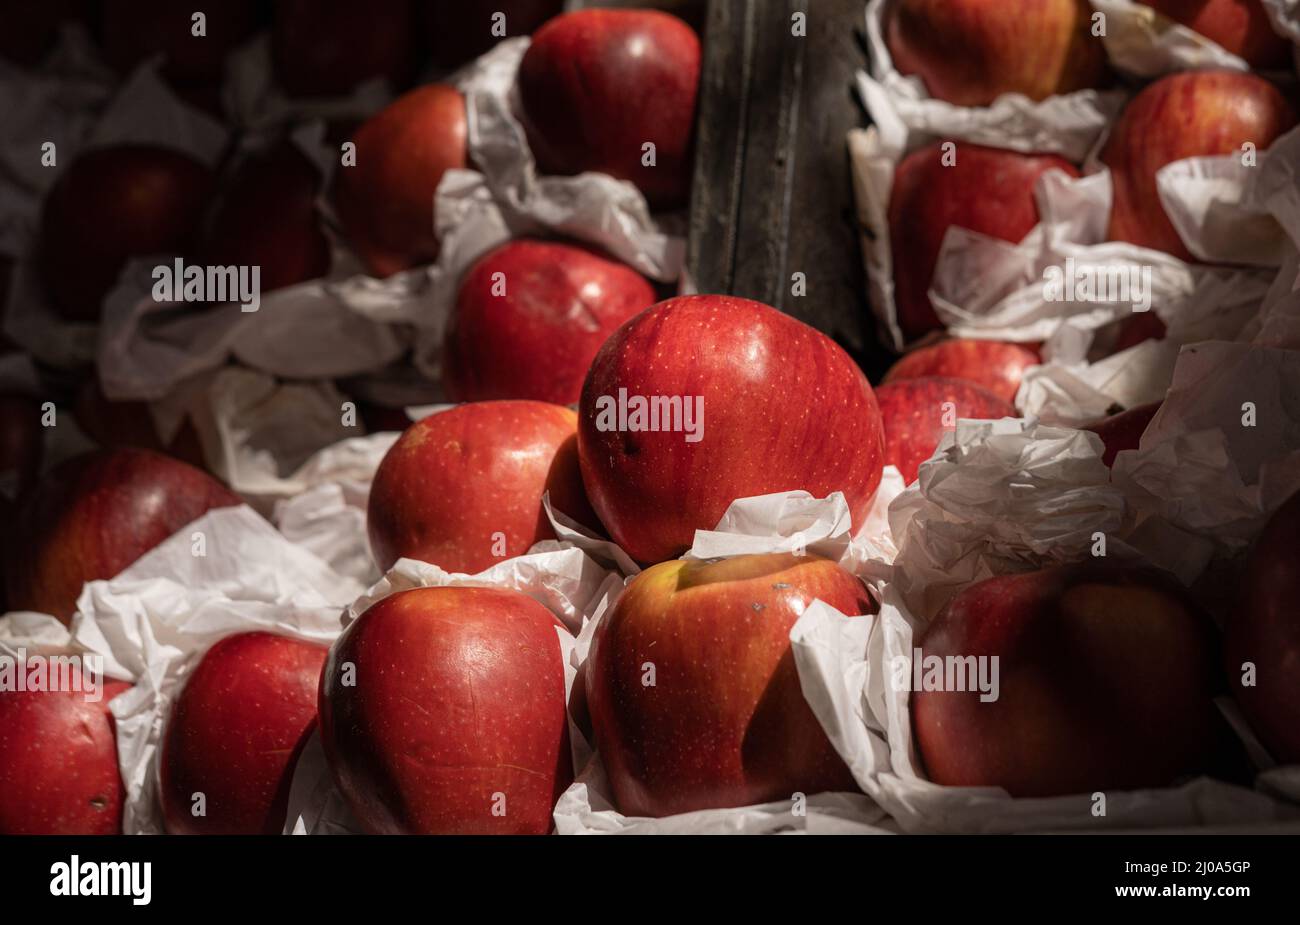 Apples in local market, dramatic light Stock Photo